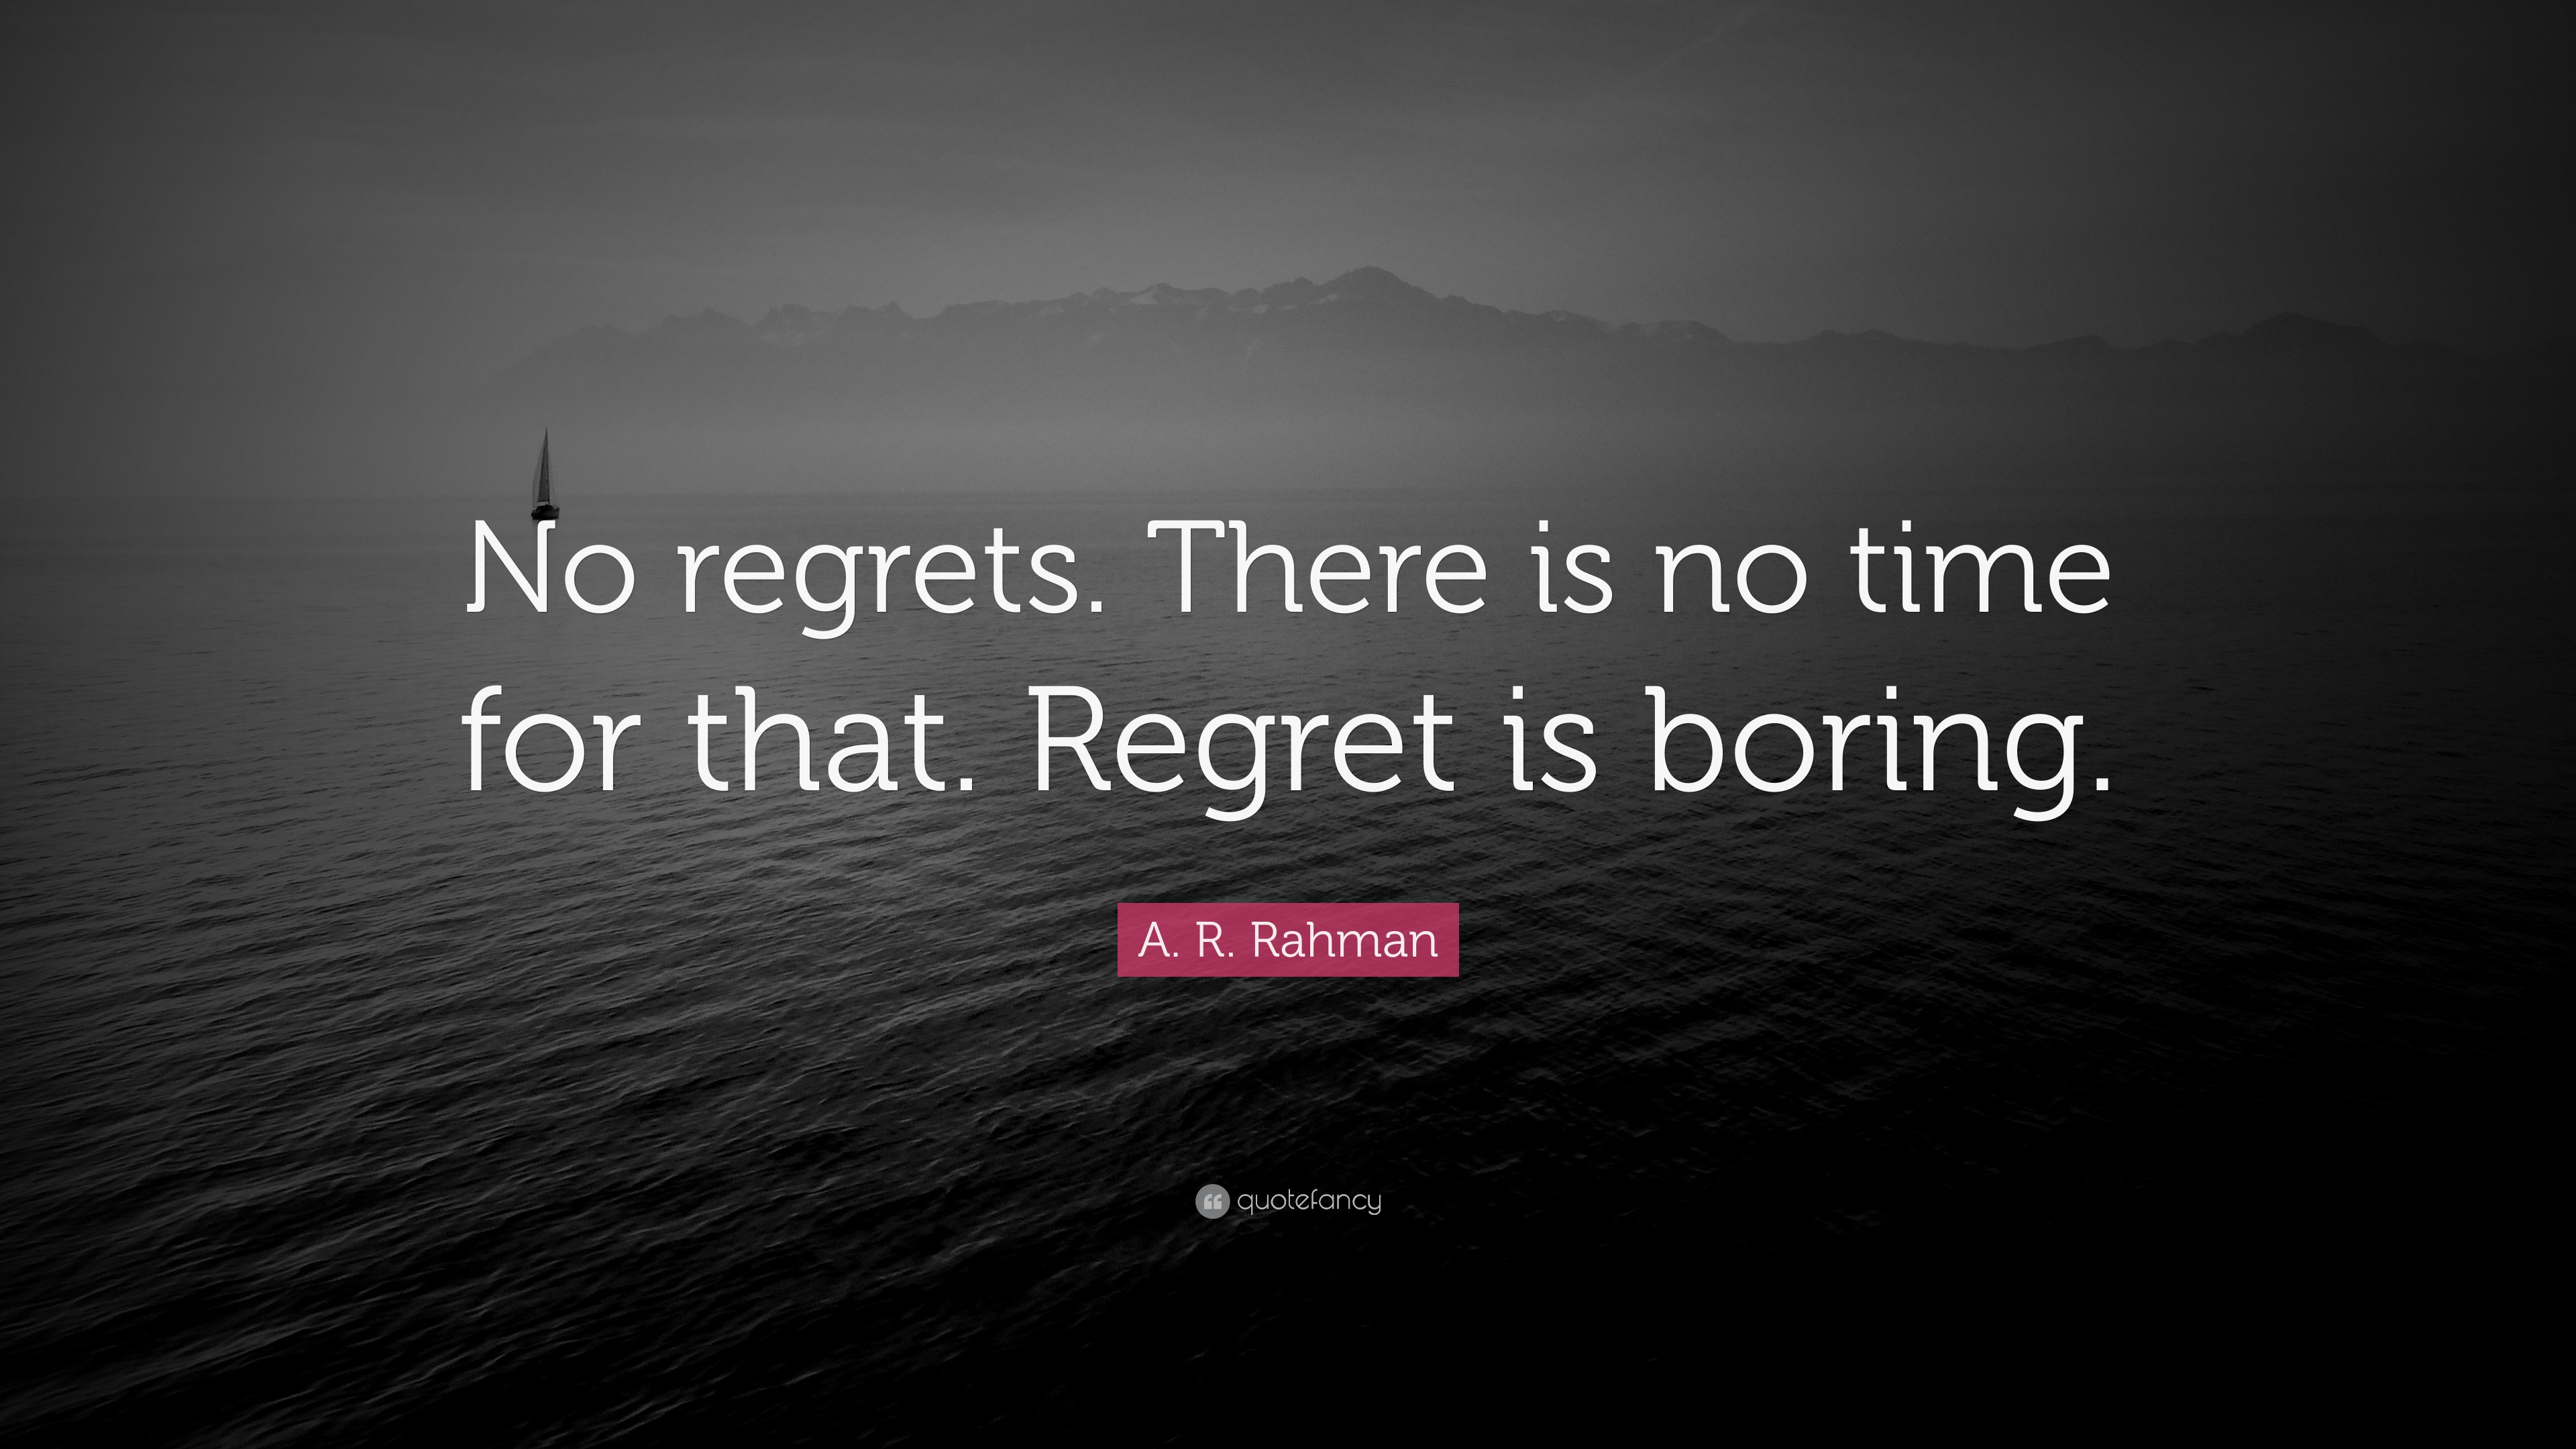 A. R. Rahman Quote “No regrets. There is no time for that